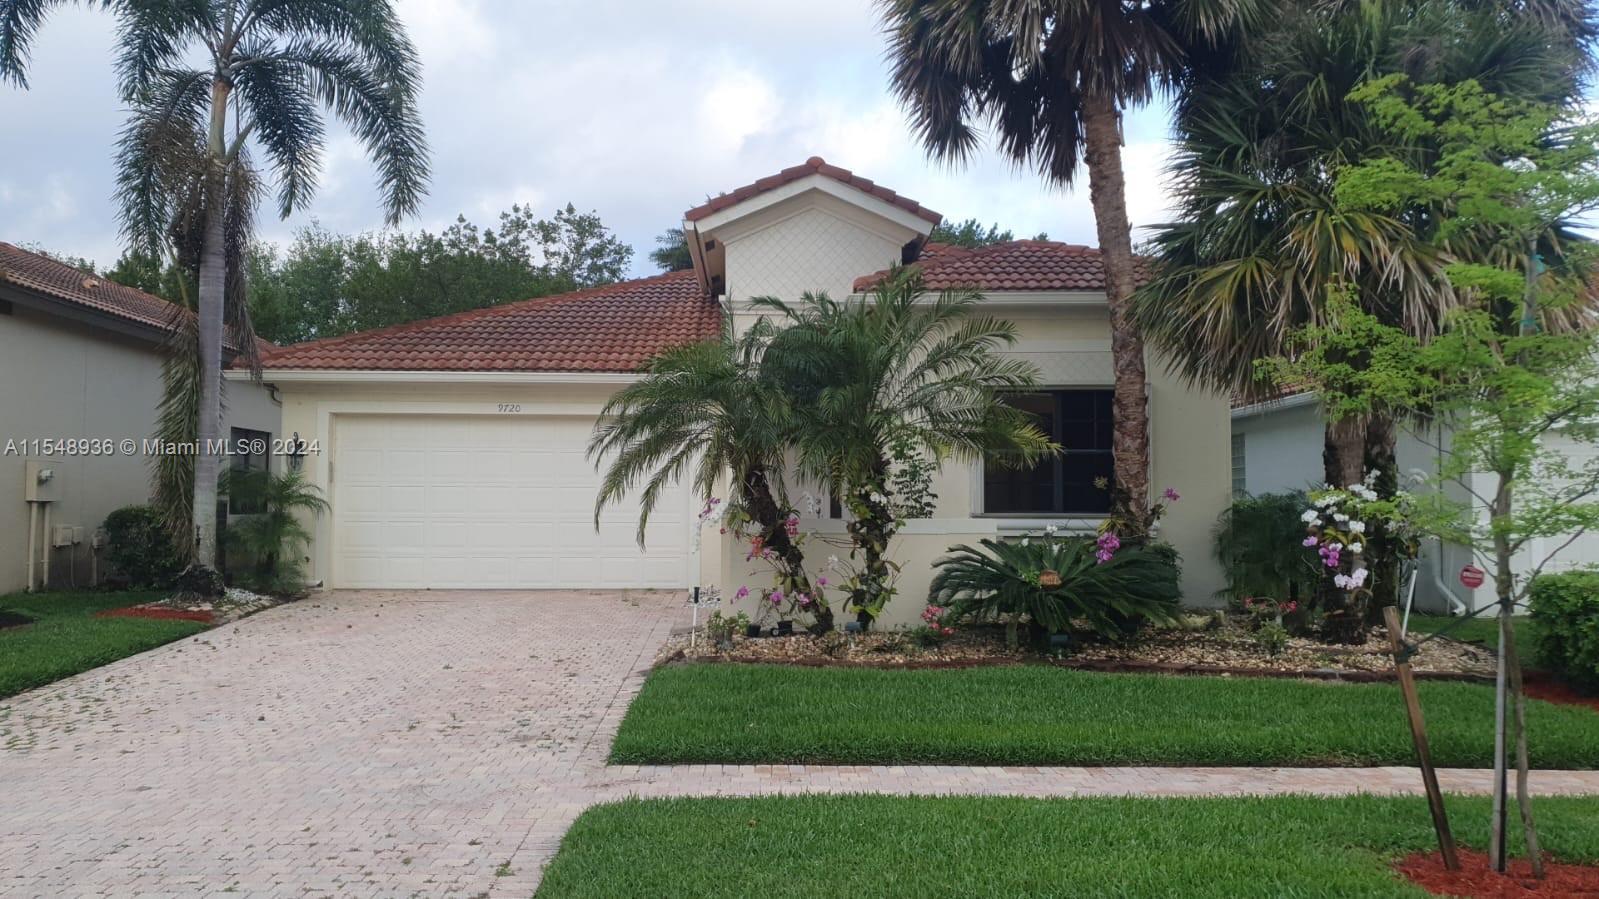 Photo of 9720 Isles Cay Dr in Delray Beach, FL